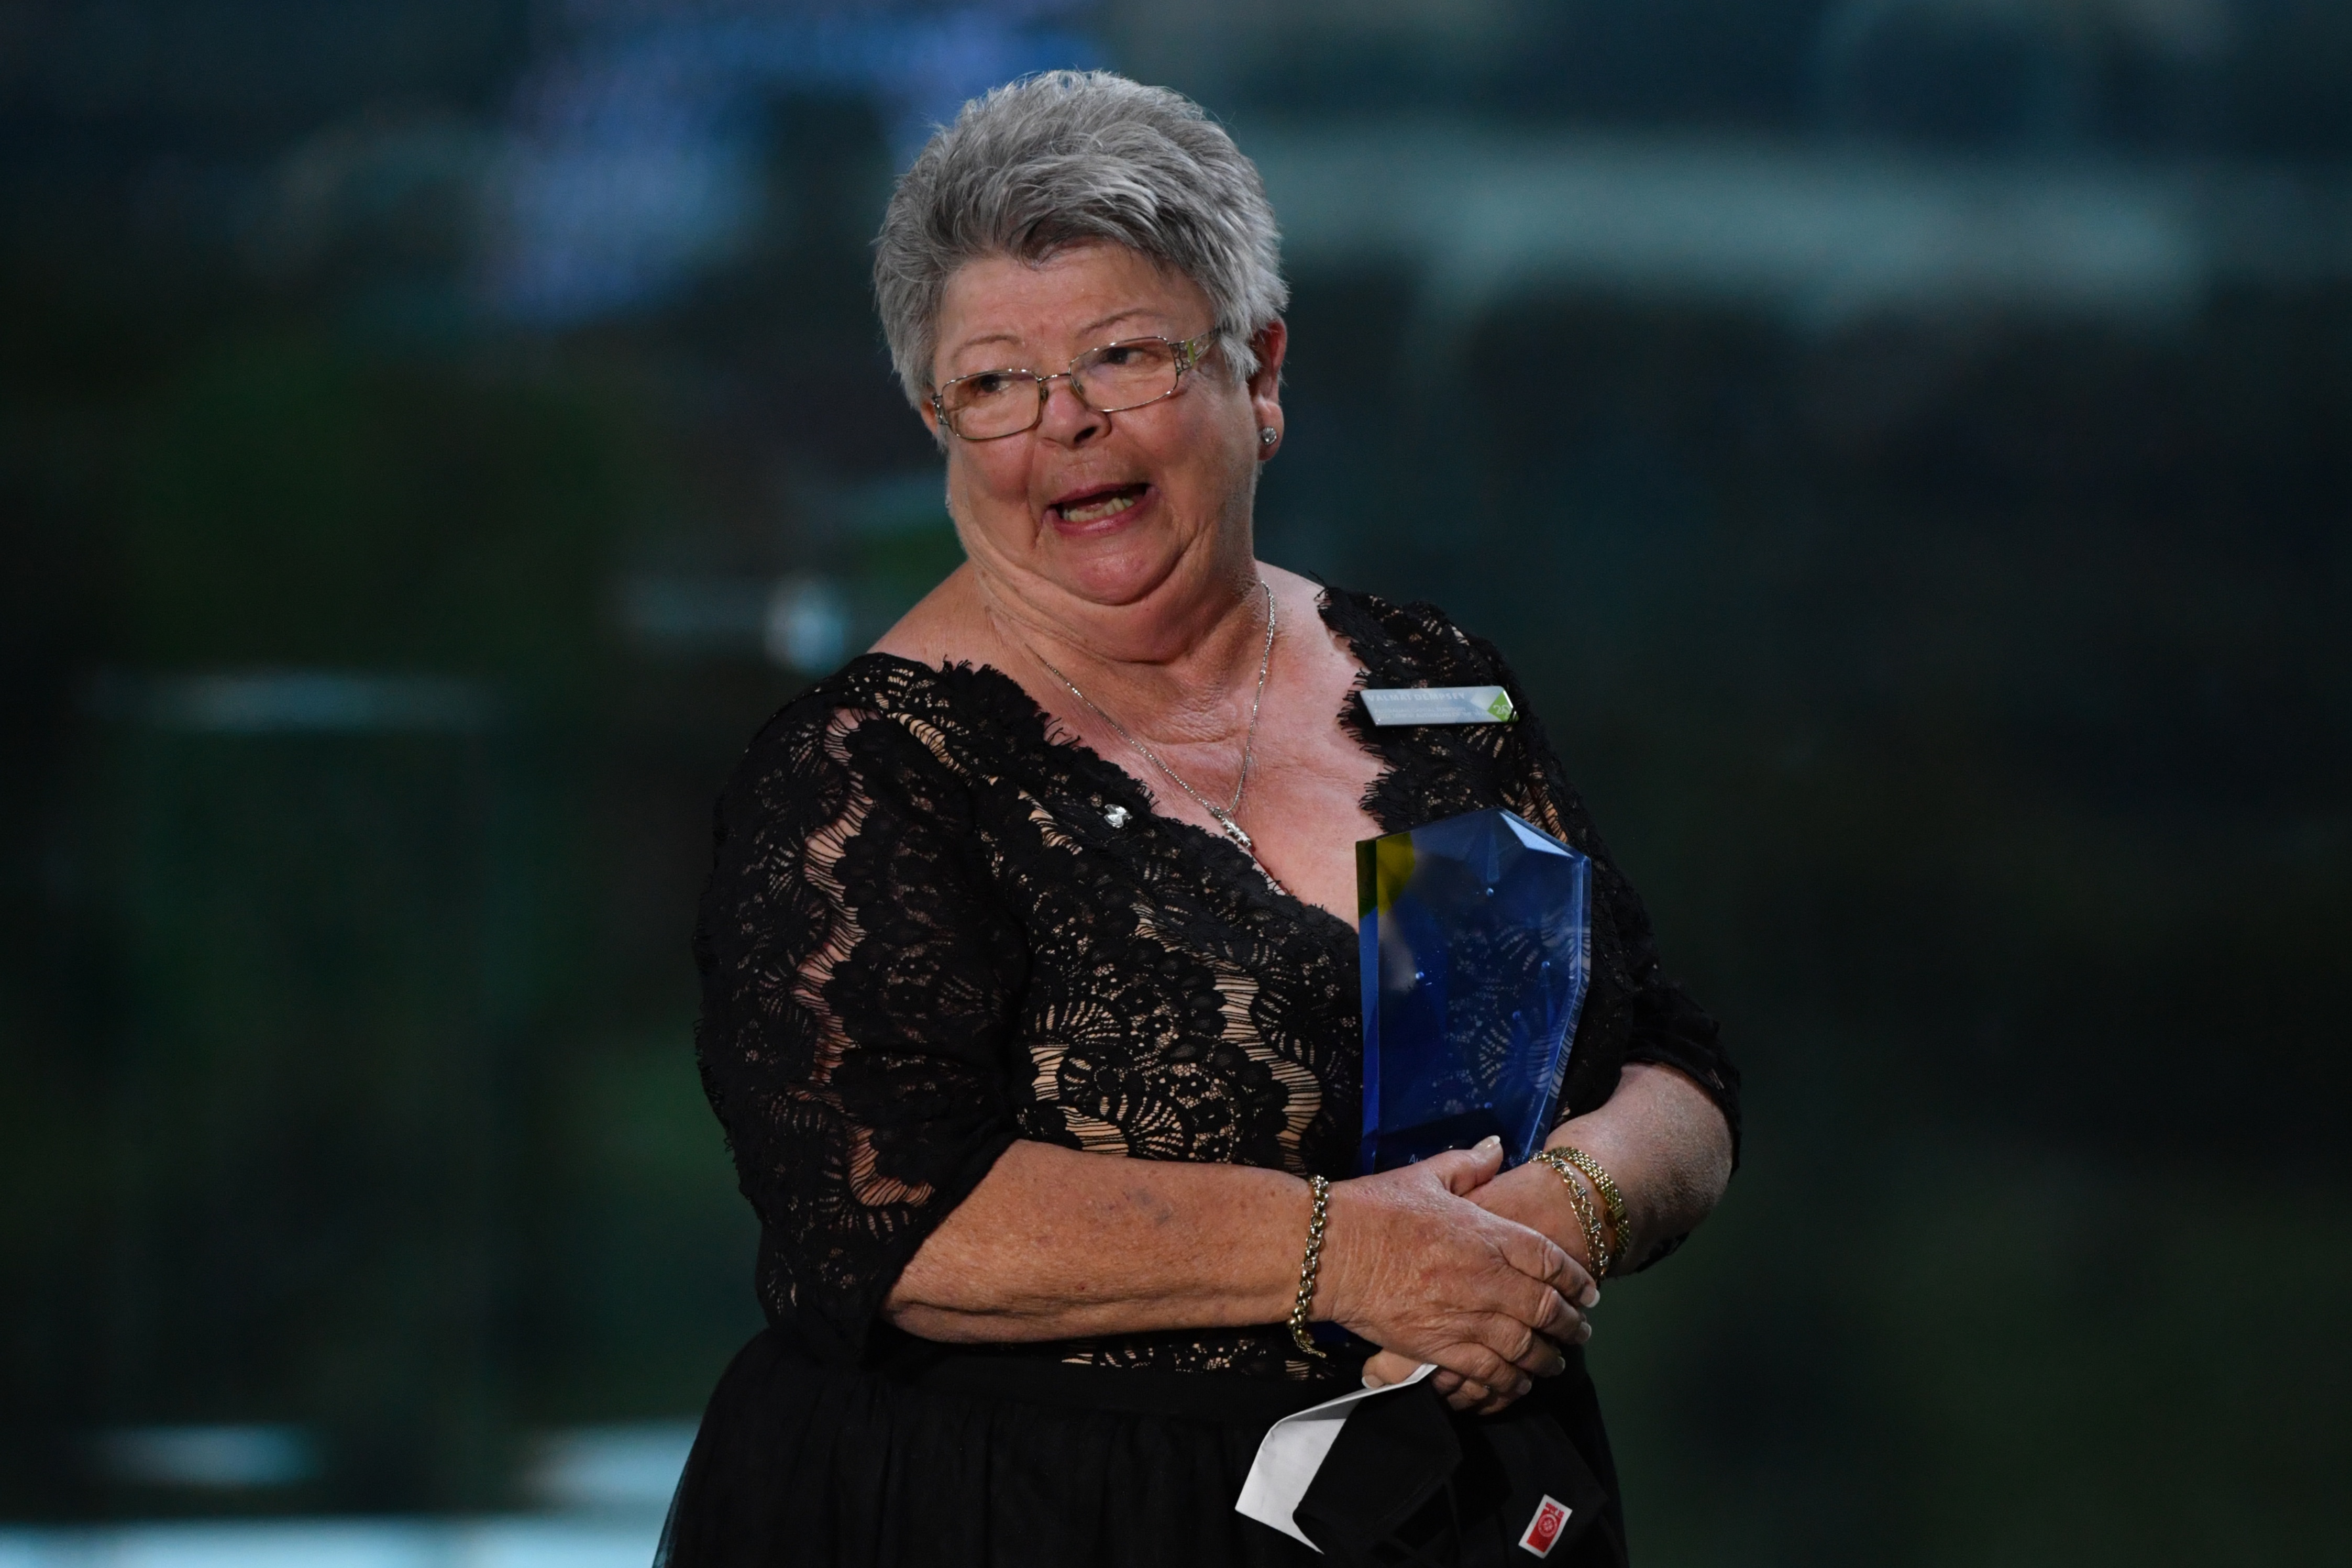 Senior Australian of the Year Valmai Dempsey wins during the 2022 Australian of the Year Awards ceremony, at the National Arboretum in Canberra, Tuesday, January 25, 2022. (AAP Image/Mick Tsikas) NO ARCHIVING